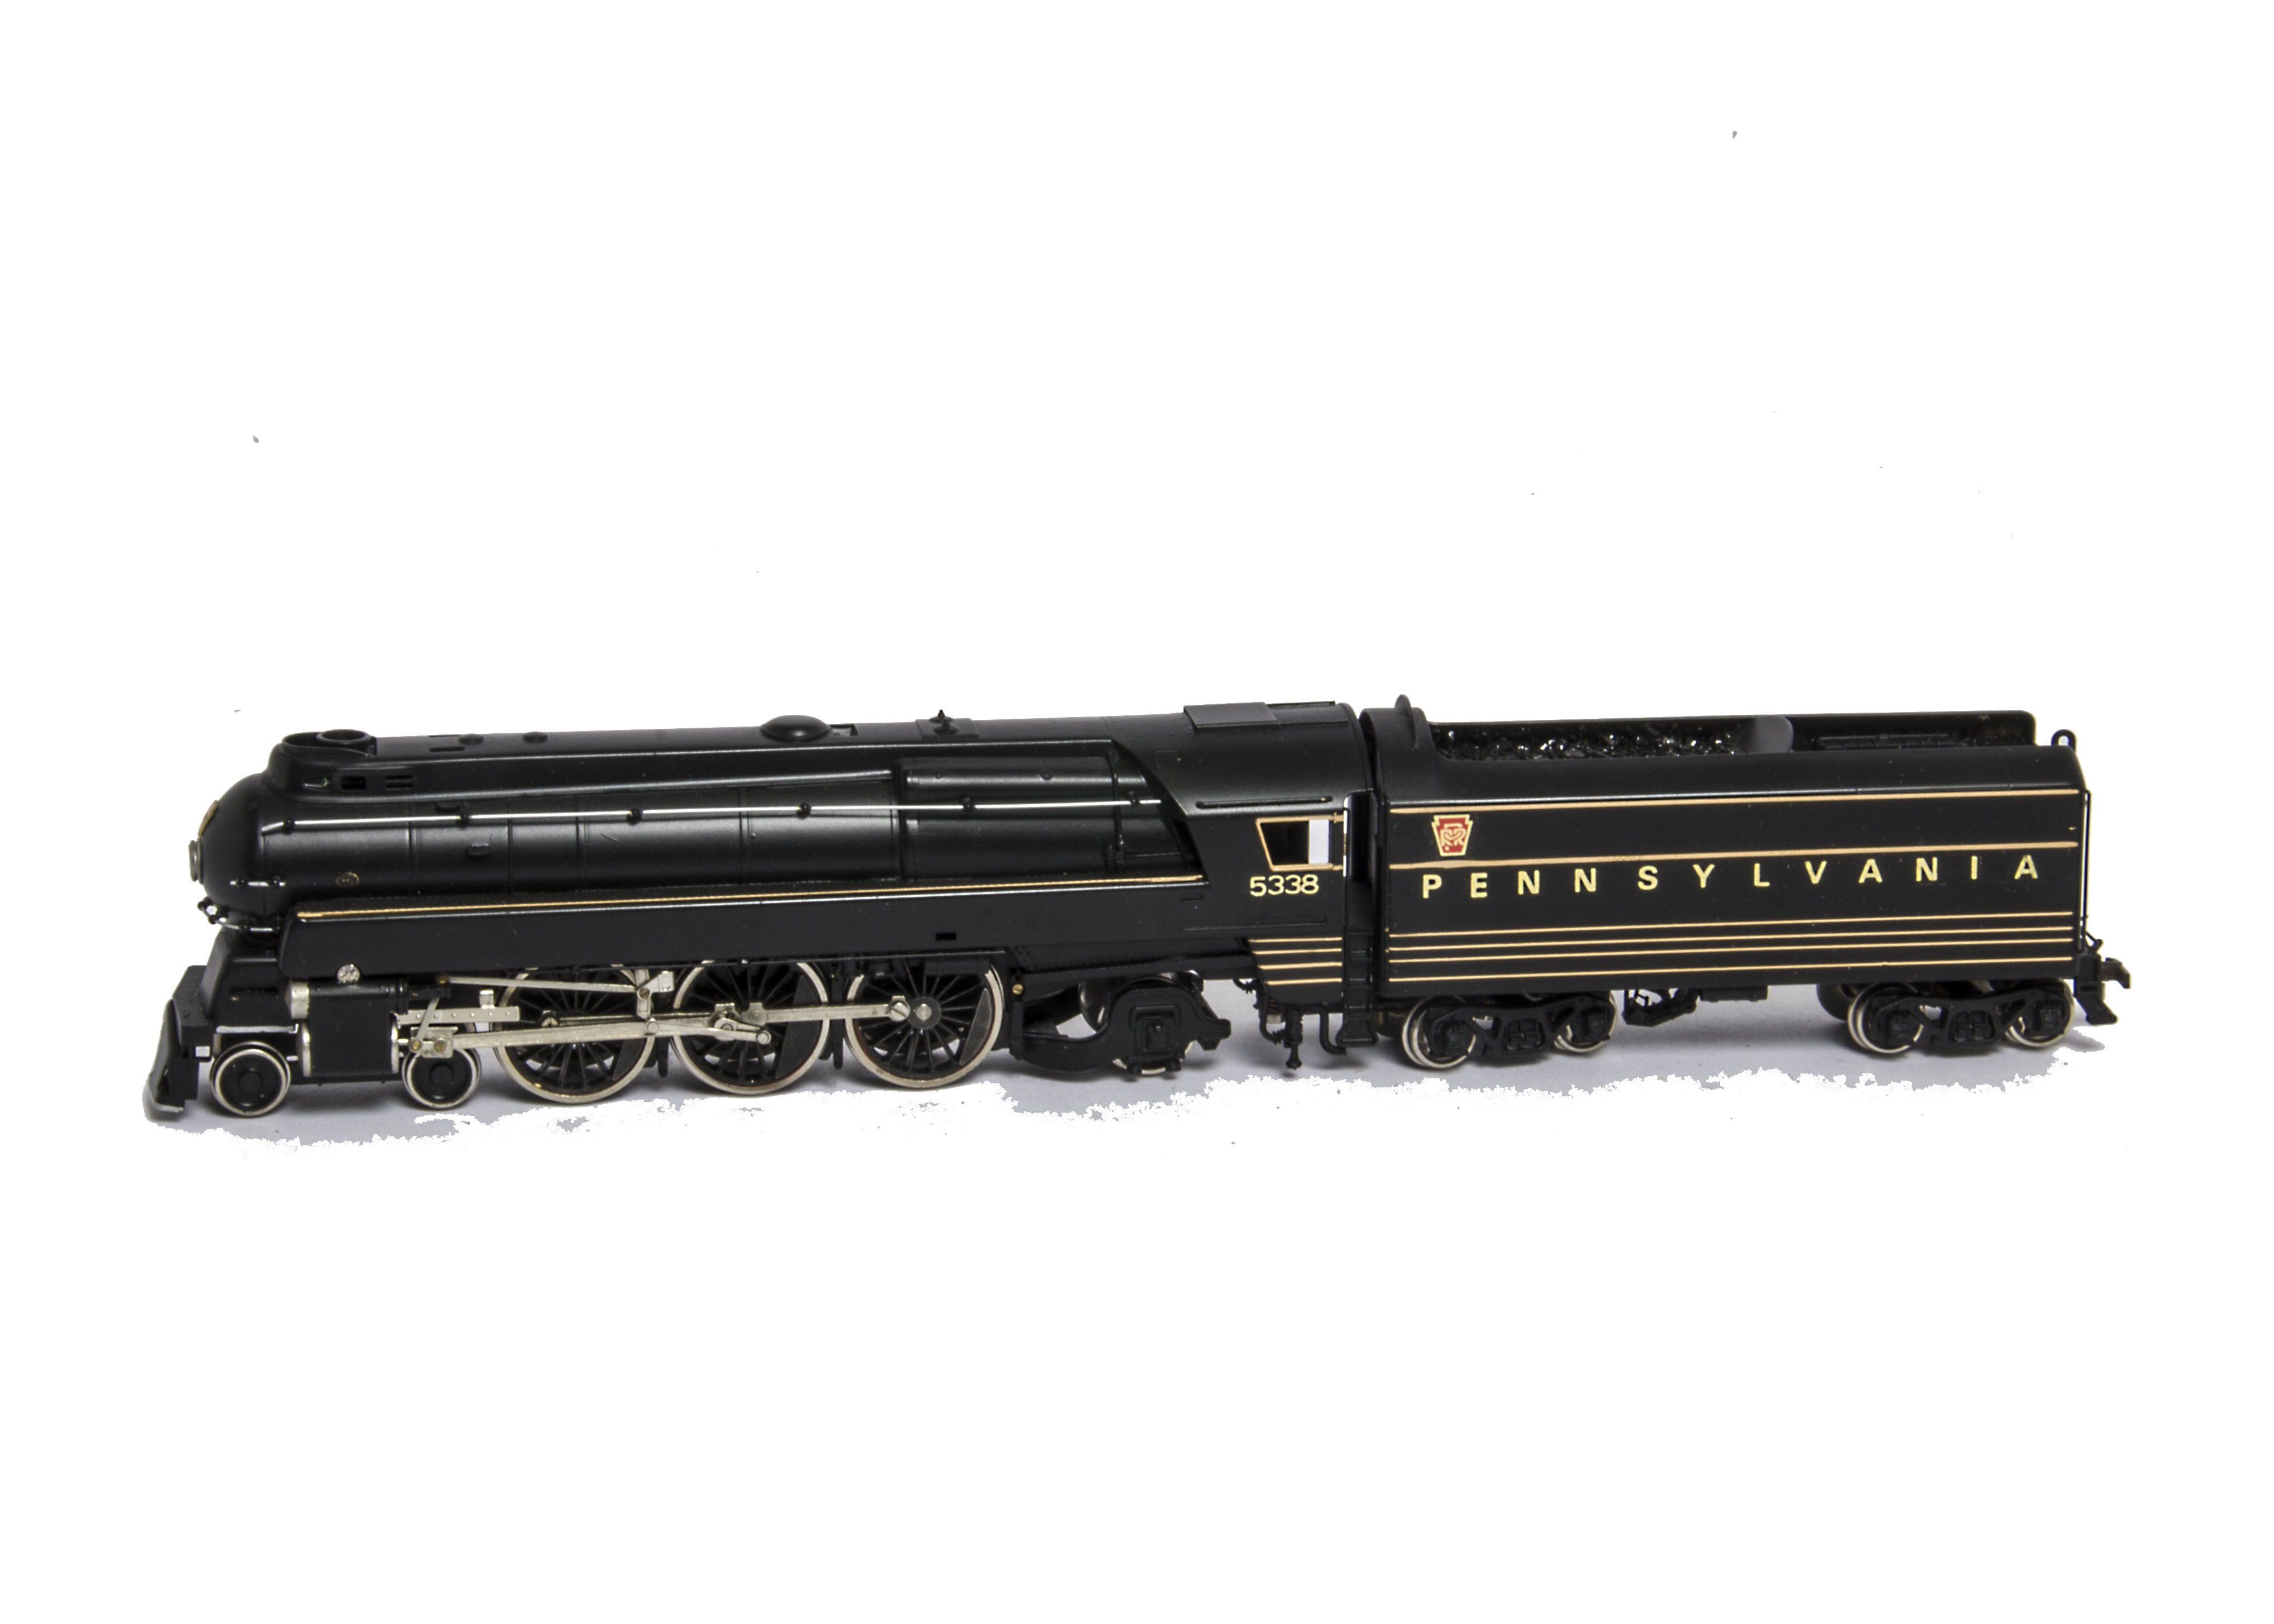 An H0 Gauge Pennsylvania RR streamlined 4-6-2 Locomotive and Tender by Alco Models, in gold-lined